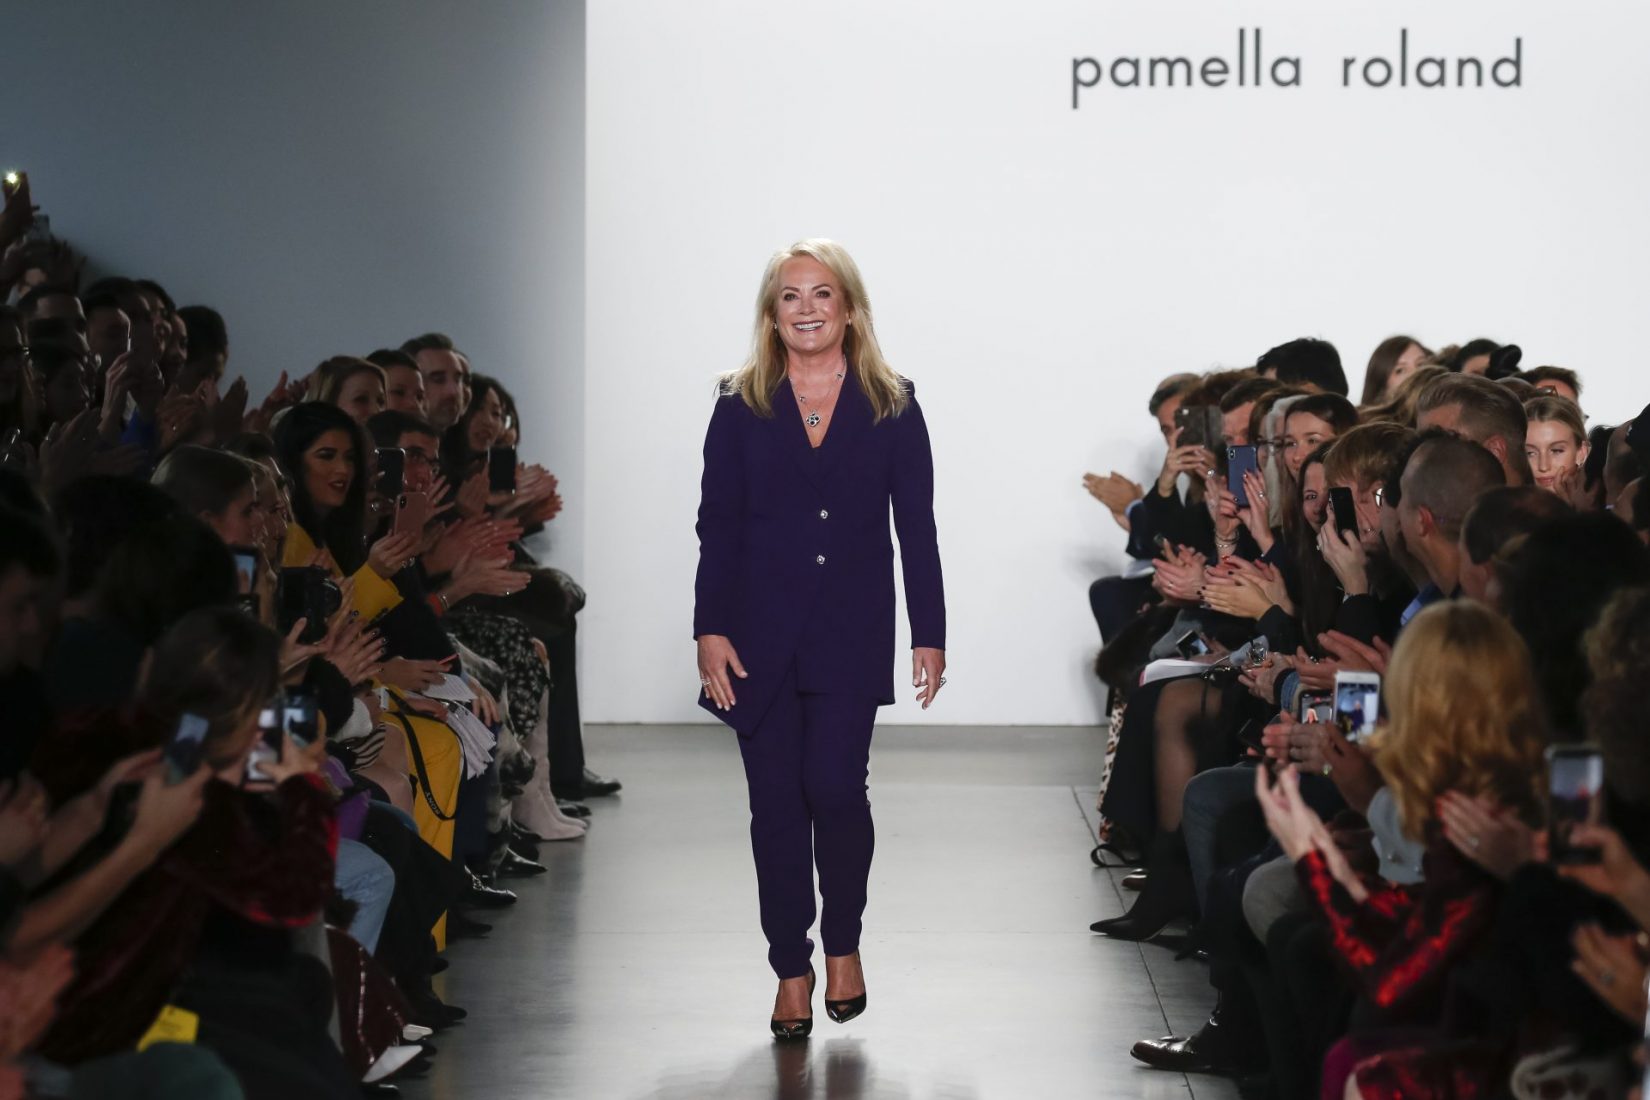 Inspired by Stained Glass Windows, Pamella Roland’s Fall/Winter 2019 Runway Show Stuns